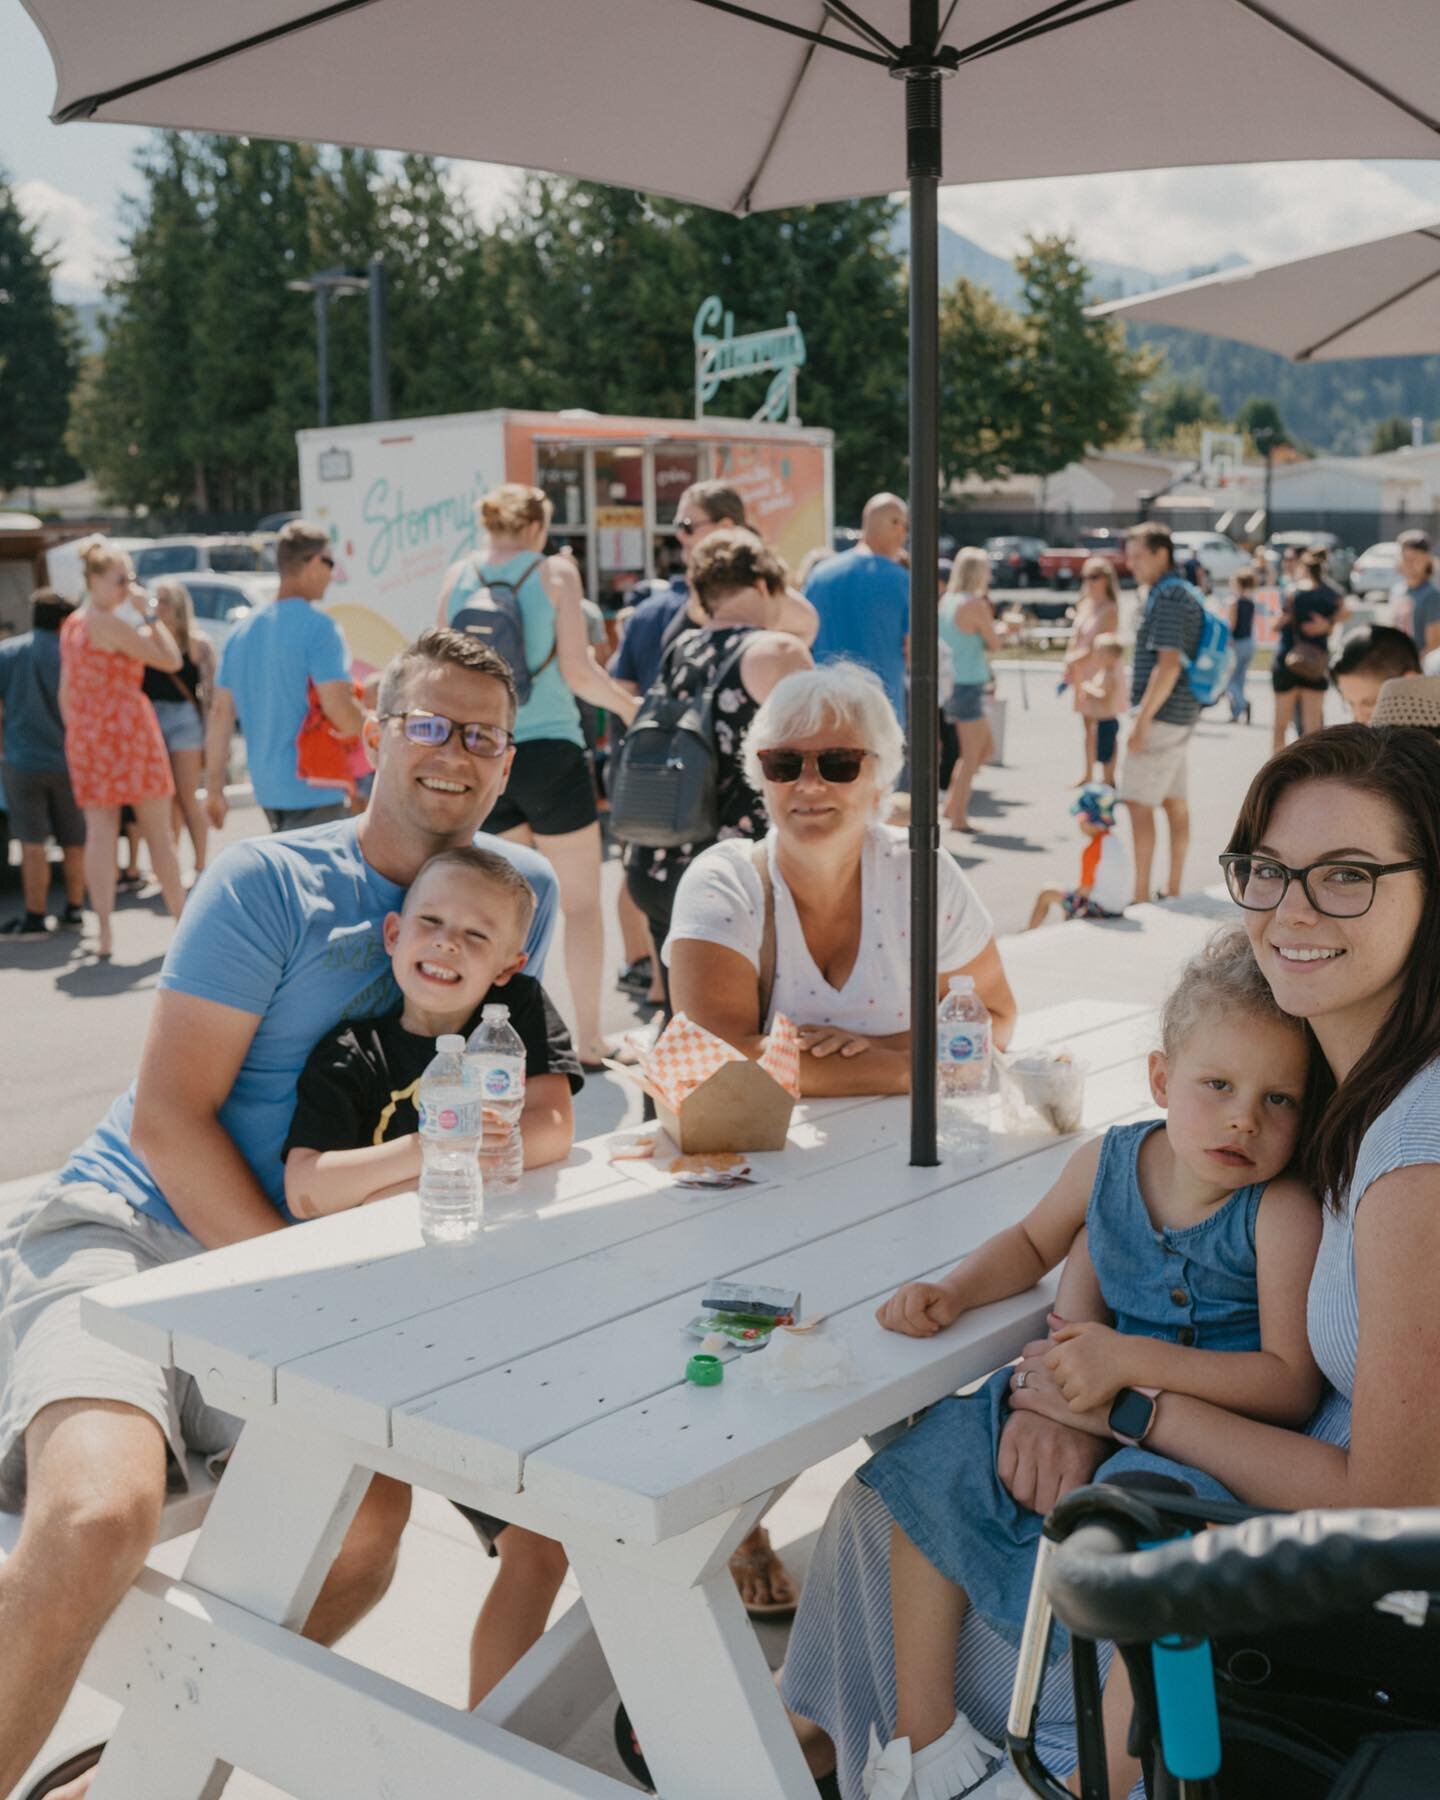 The best place to be on a Sunday! ☀️ 

And Pastor Mike&rsquo;s message tomorrow &ldquo;If you could go back in time&rdquo; is one absolutely everyone needs to hear.

Join us for community, coffee on the patio, live music and a message of hope - we ca